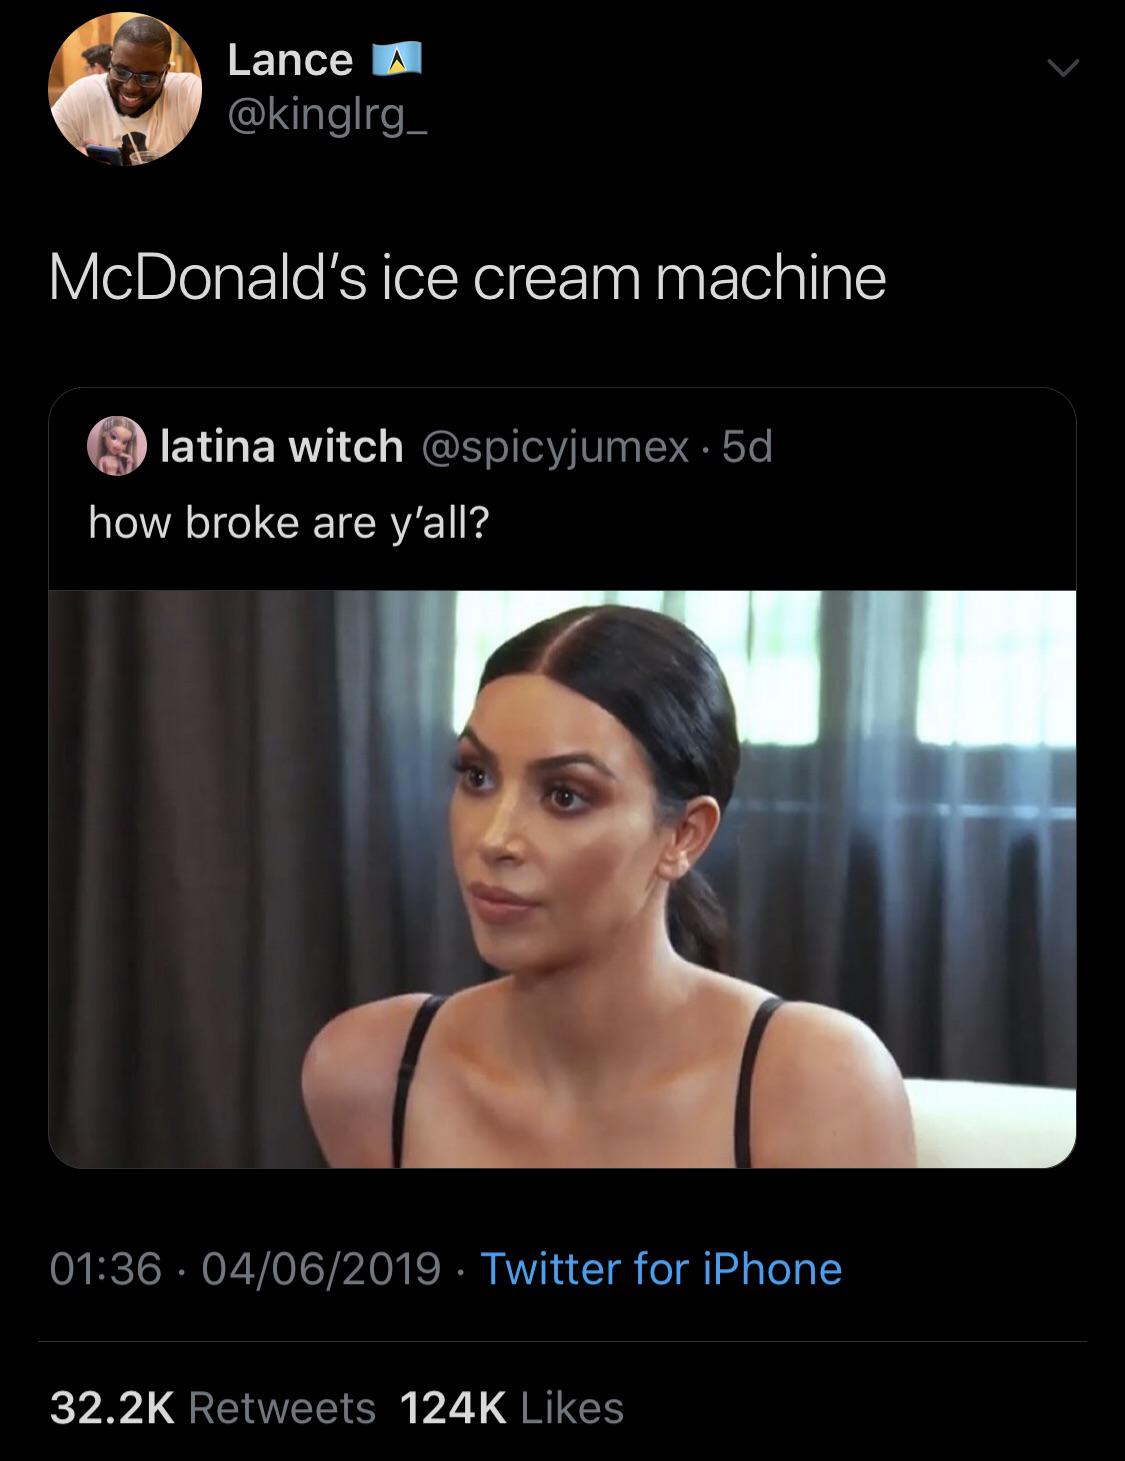 men swear they know everything meme - Lance A McDonald's ice cream machine latina witch 5d how broke are y'all? 04062019. Twitter for iPhone